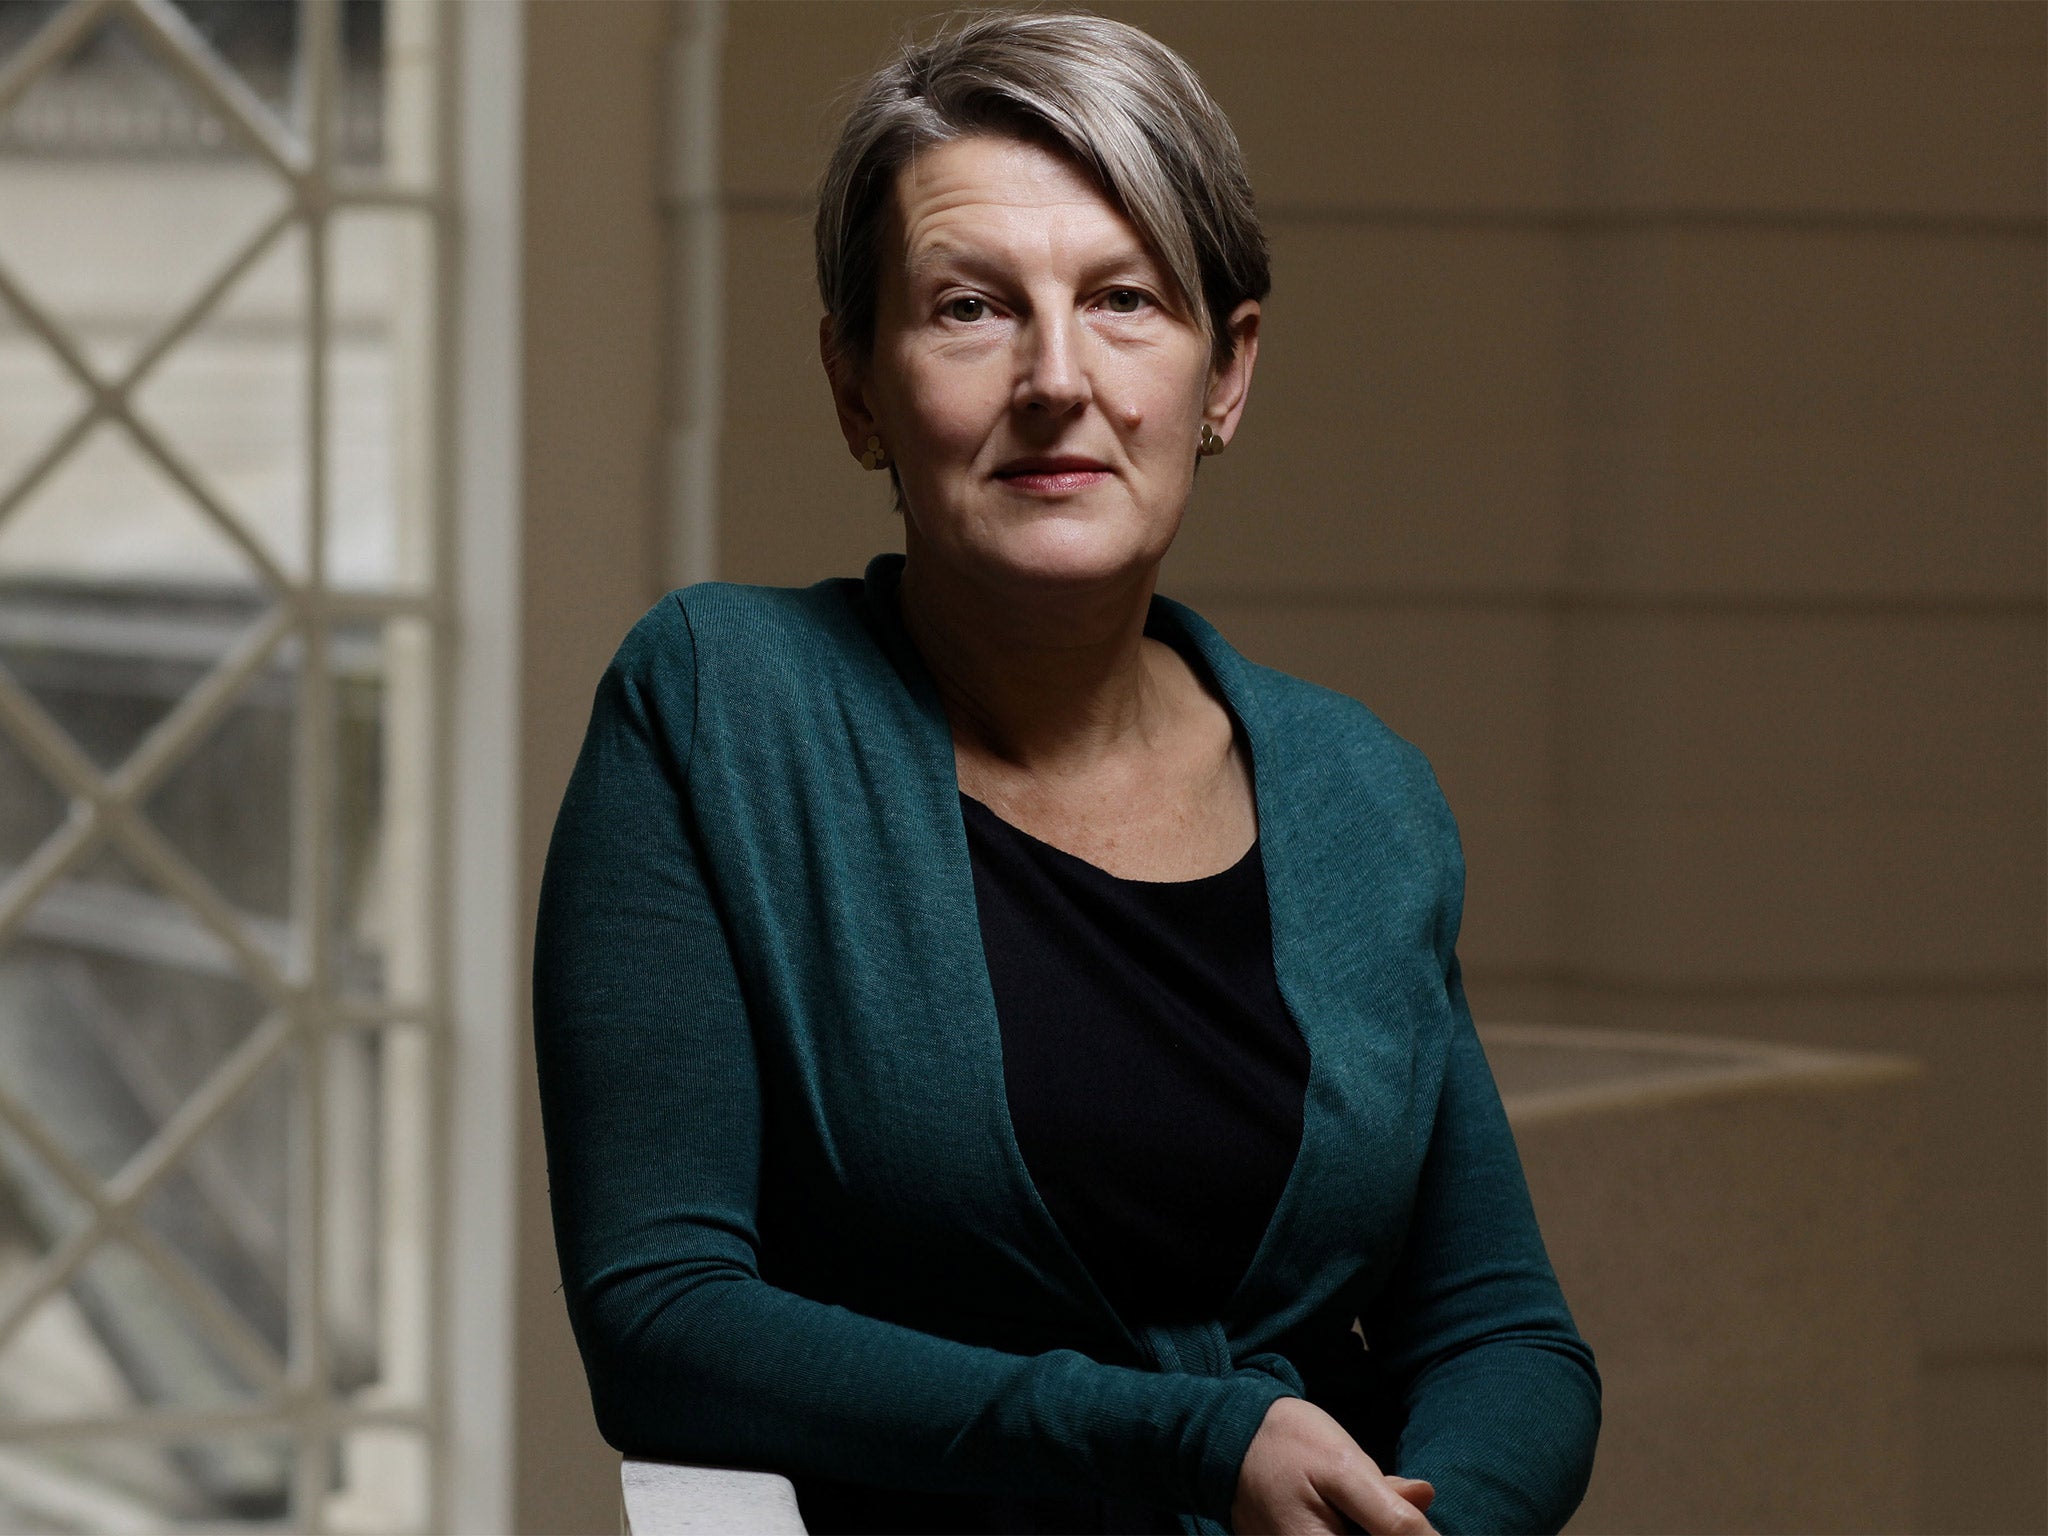 Penelope Curtis will leave Tate Britain after five years in the top job in British art